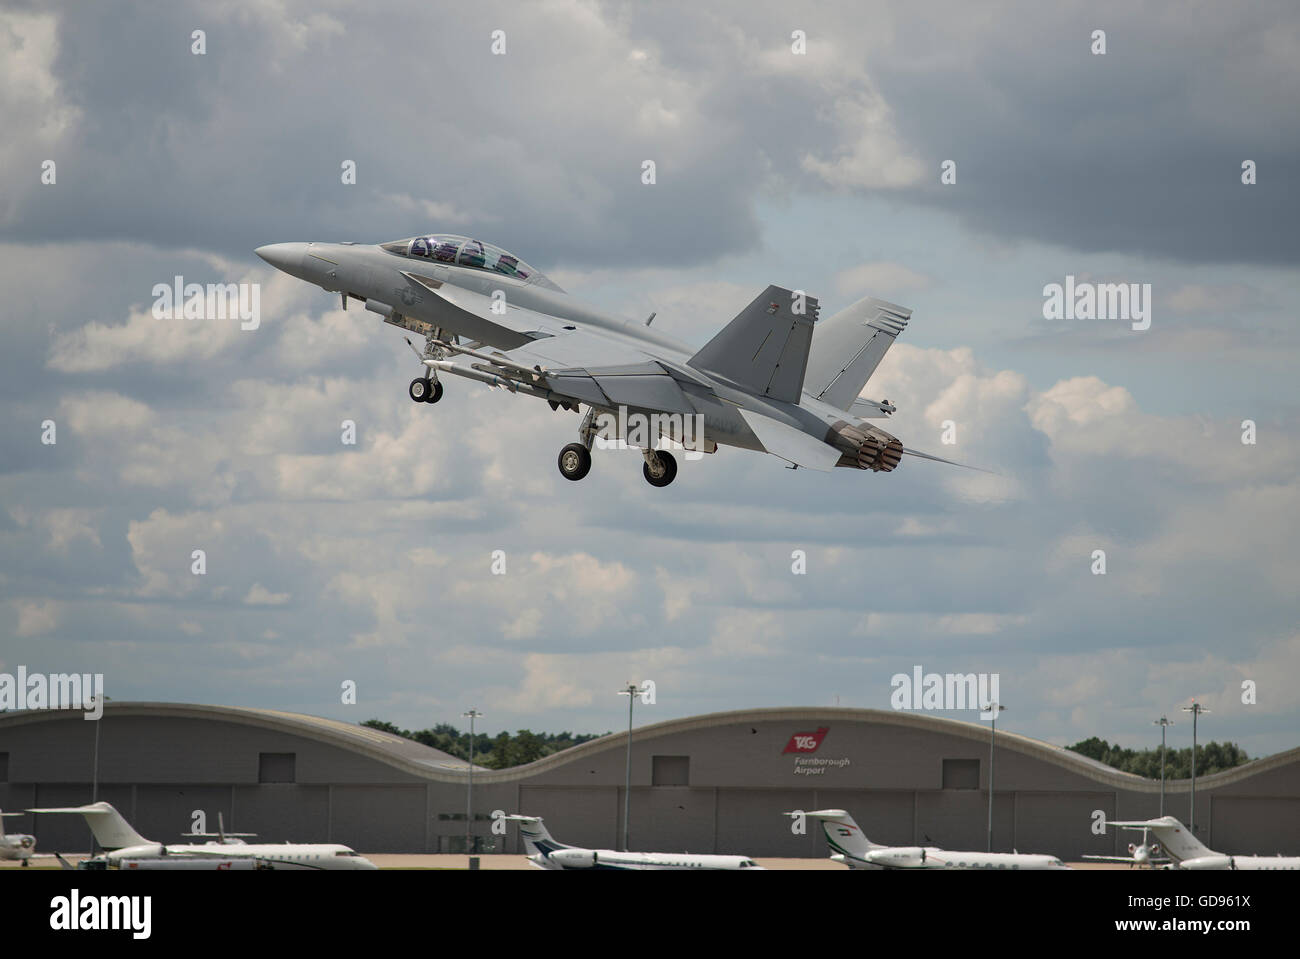 Farnborough, Hampshire UK. 14th July 2016. Day 4 of the Farnborough International Trade Airshow. USAF Boeing F/A-18 Hornet takeoff. Credit:  aviationimages/Alamy Live News. Stock Photo